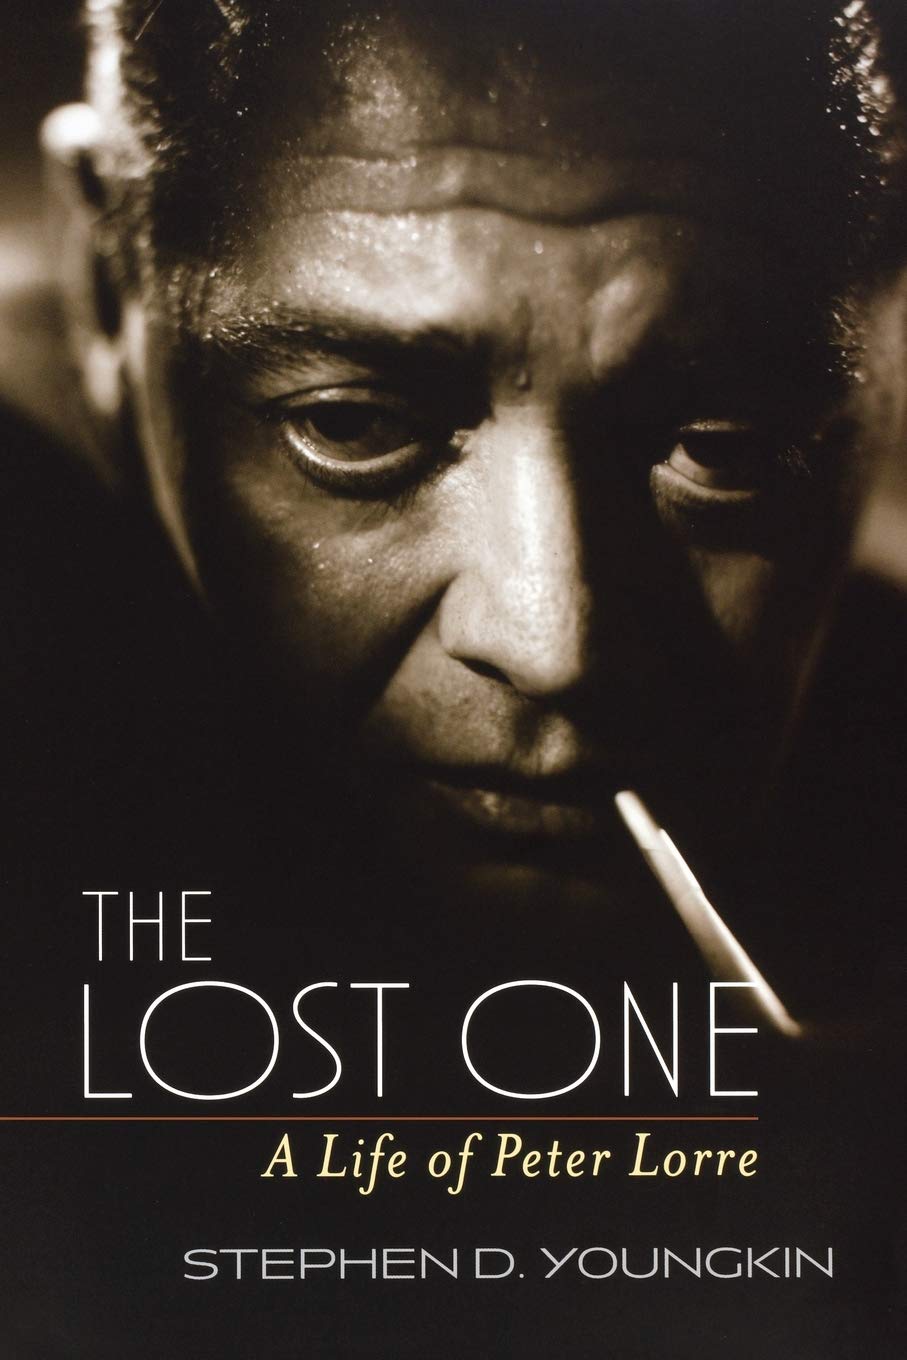 The Lost One:  A Life of Peter Lorre